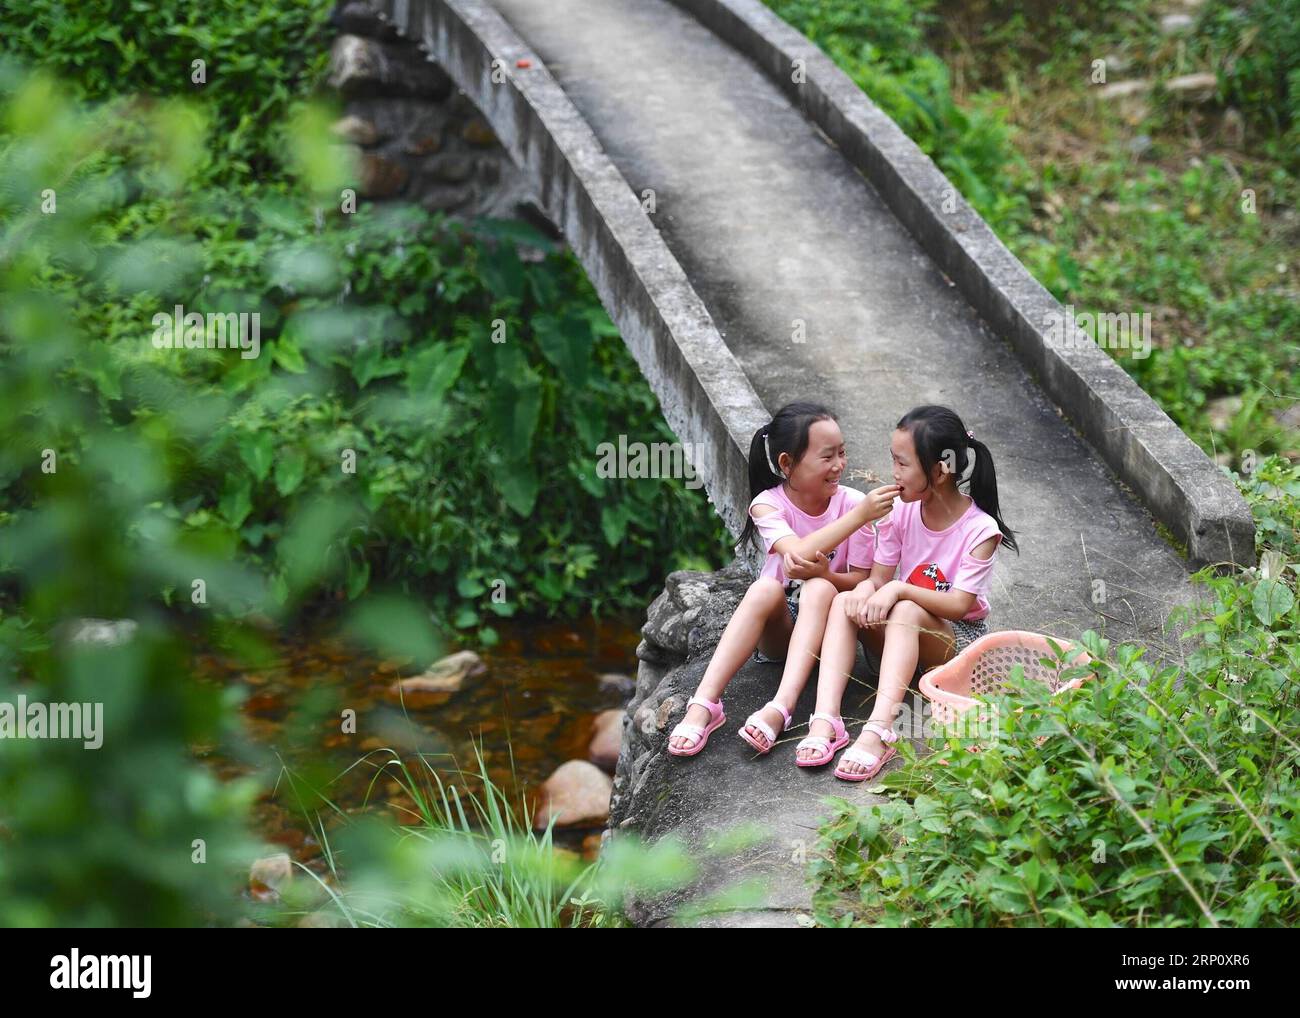 (180529) -- NANCHANG, May 29, 2018 -- Eleven-year-old Pan Xuejing (L) and her twin sister Pan Xueying take a rest in Suolong Village of Yudu County, east China s Jiangxi Province, May 23, 2018. With about 1,000 residents, Suolong Village has 29 cases of multiple births, a high rate considering the modest population size. ) (lmm) CHINA-JIANGXI-VILLAGE-MULTIPLE BIRTHS-TWINS-LIFE (CN) HuxChenhuan PUBLICATIONxNOTxINxCHN Stock Photo